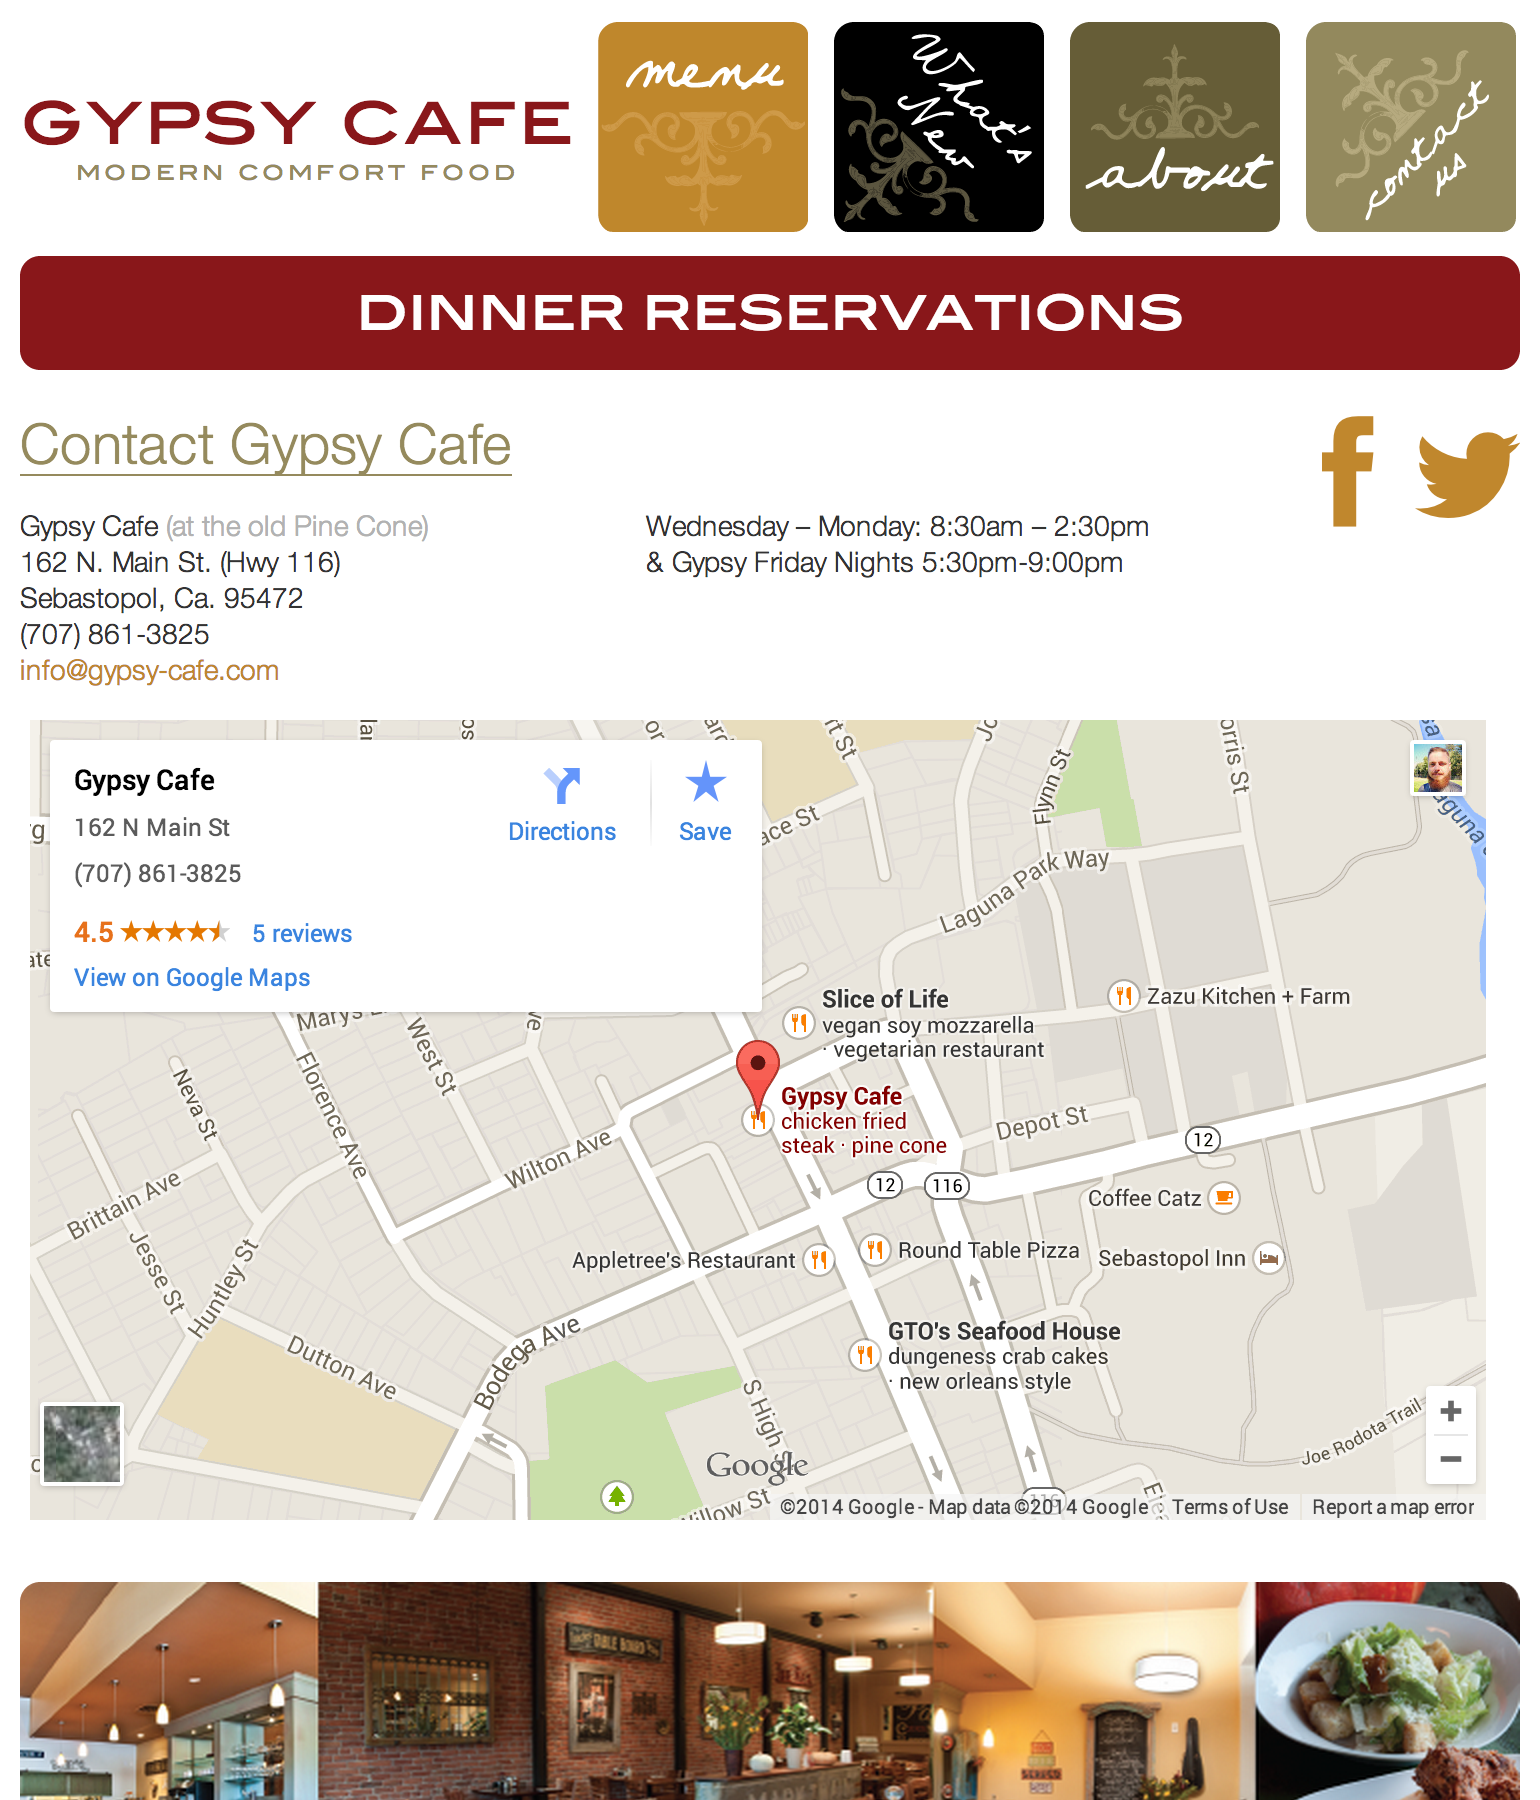 Local cafe website with menu and reservation system.